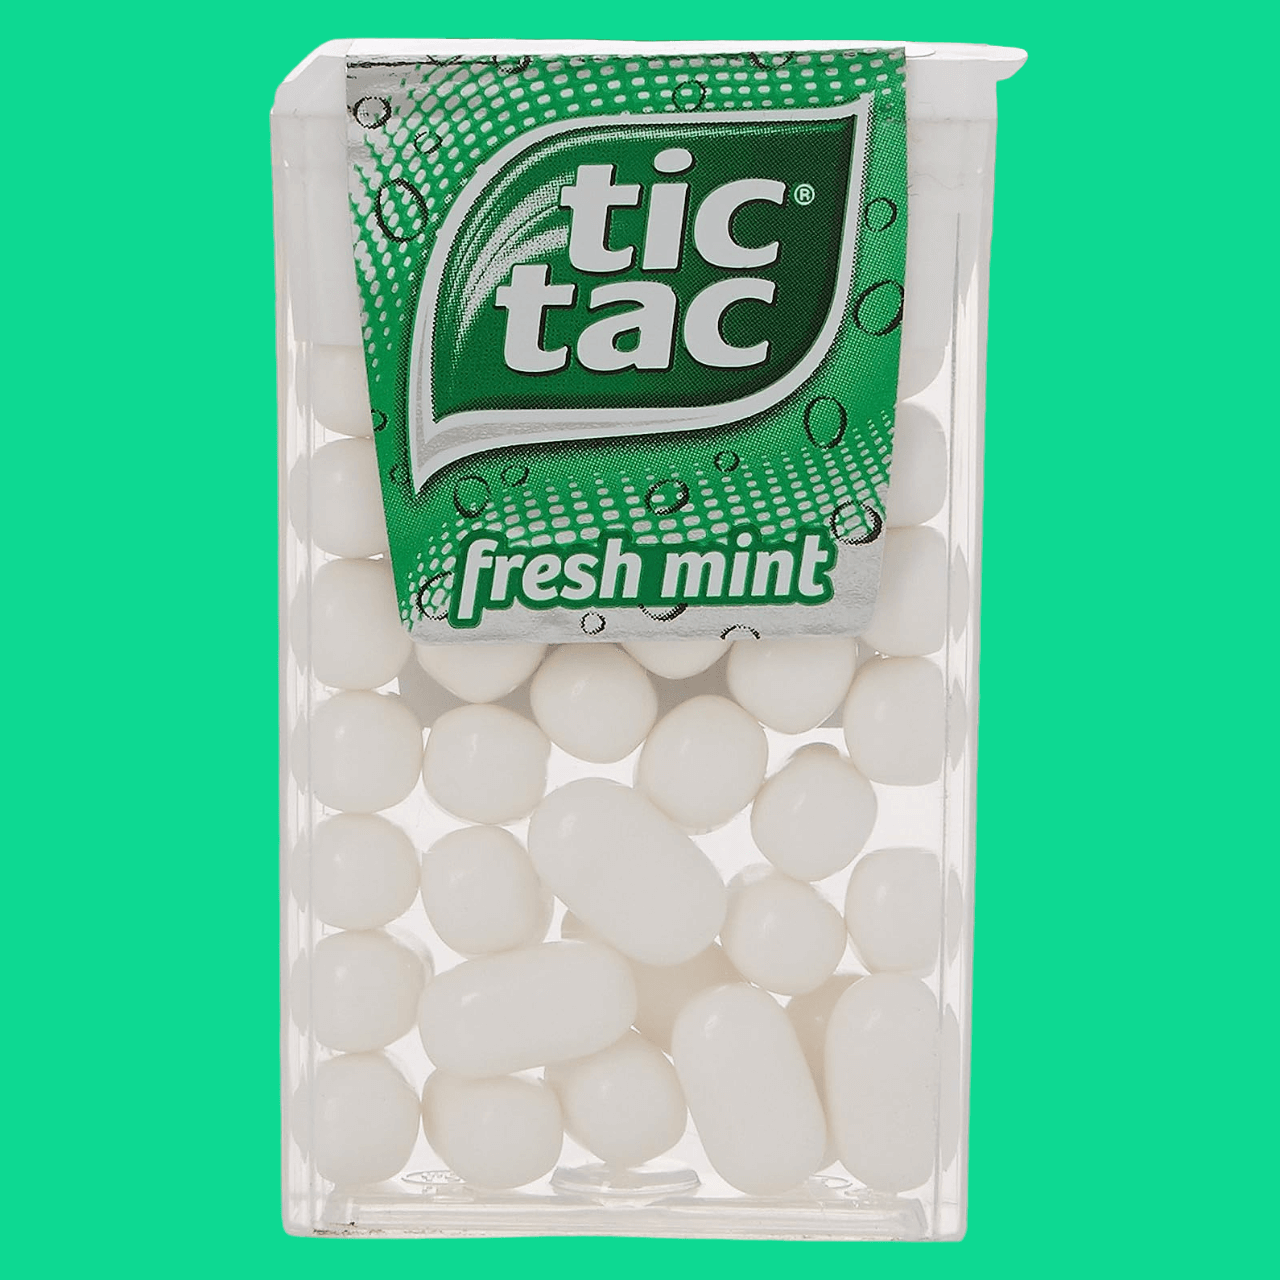 Tic Tac Fresh Mint Flavour, box of mints with green background